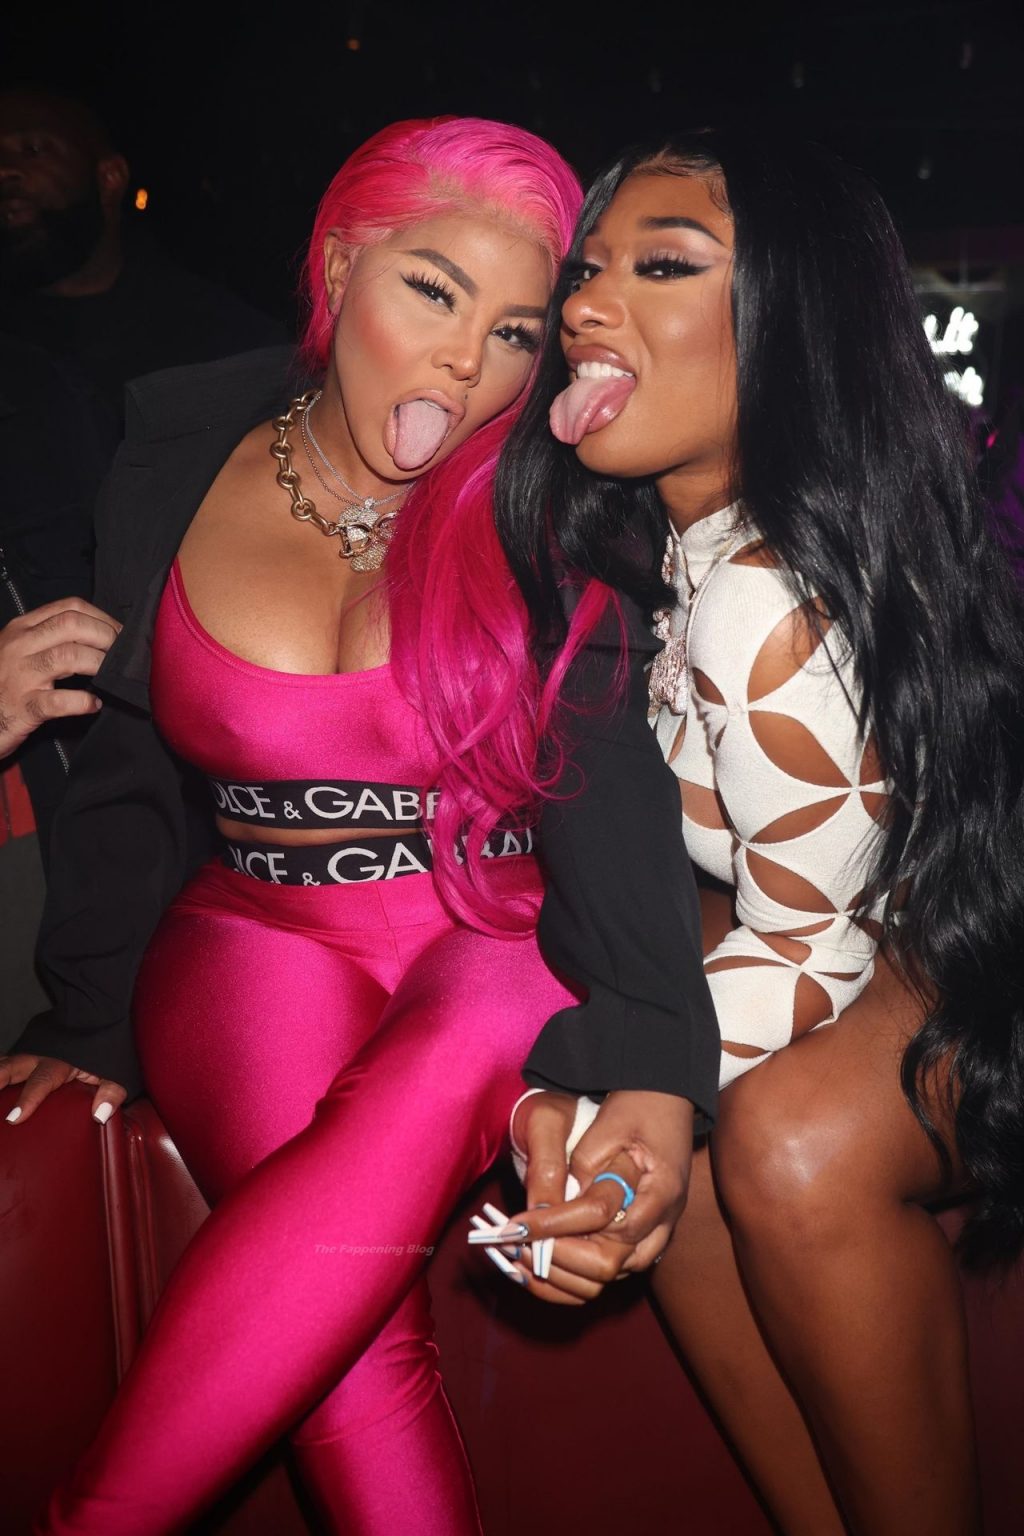 Megan Thee Stallion and Friends Get the Party Started at the BET Awards Afterparty (42 Photos)